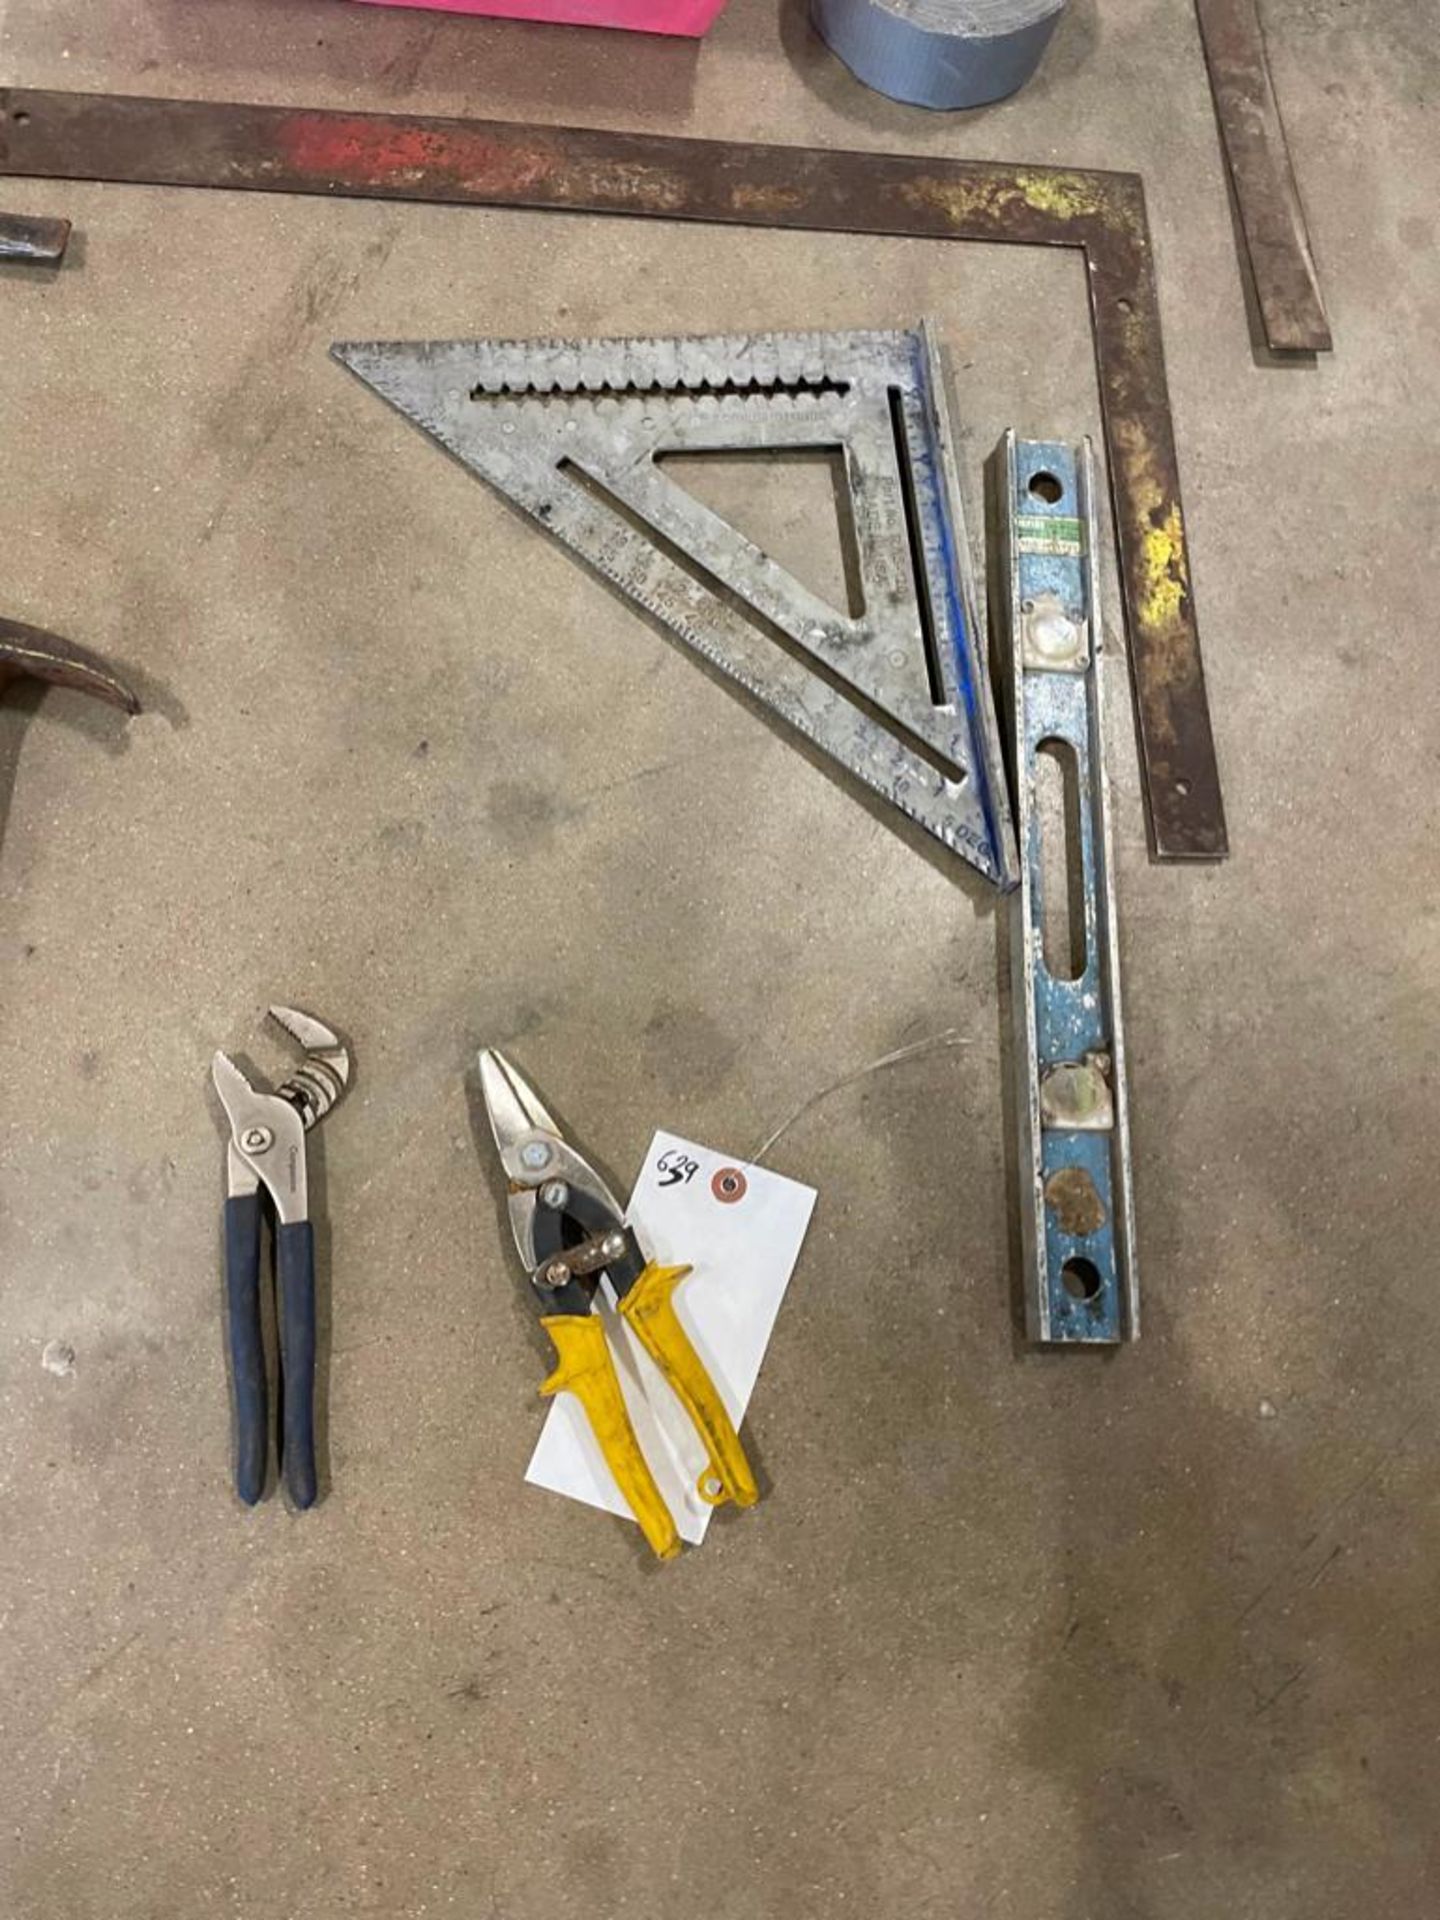 Miscellaneous Tools, Hammers, Level, Squares, etc. Located in Hazelwood, MO - Image 5 of 5